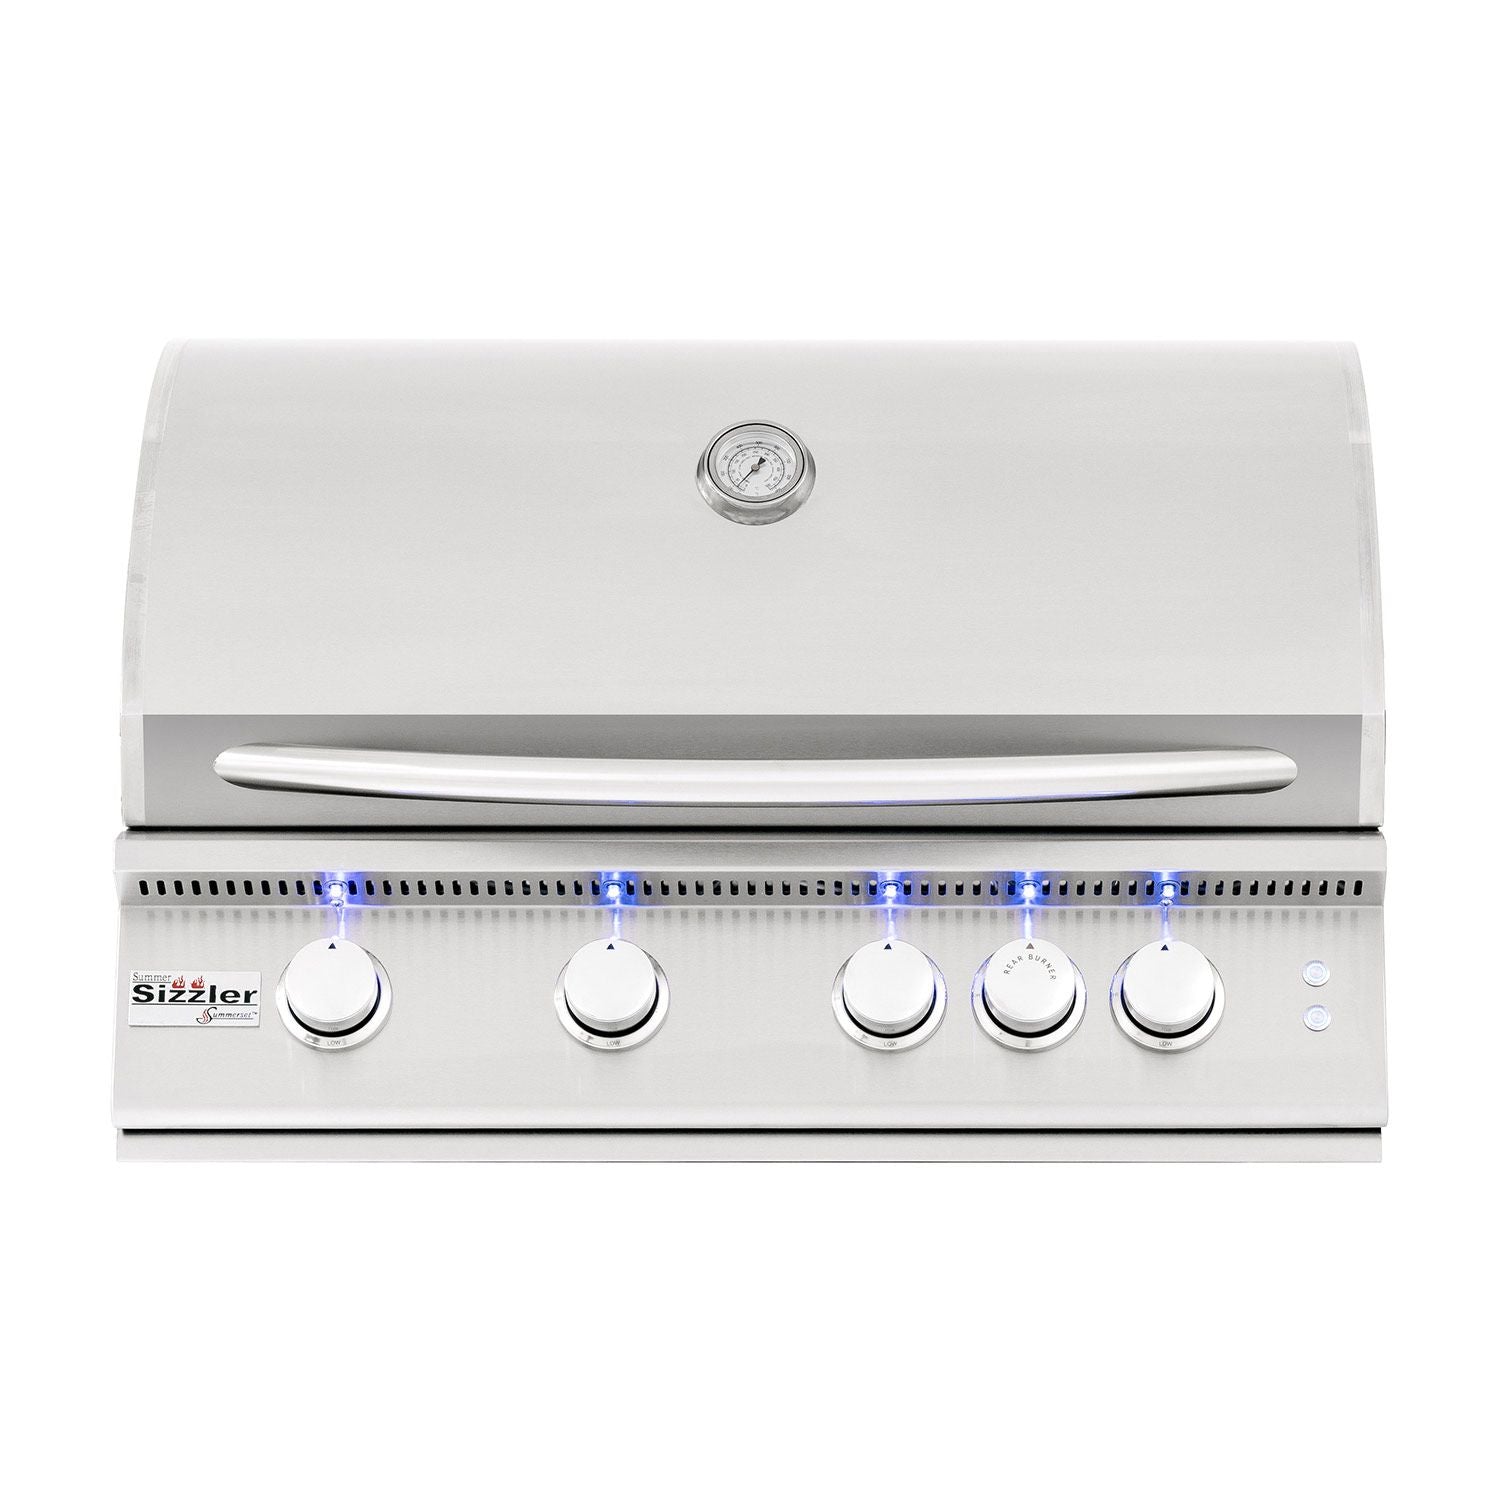 Summerset Sizzler Professional Series 32 inch Built-in Natural Gas Grill SIZPRO32-NG - BetterPatio.com